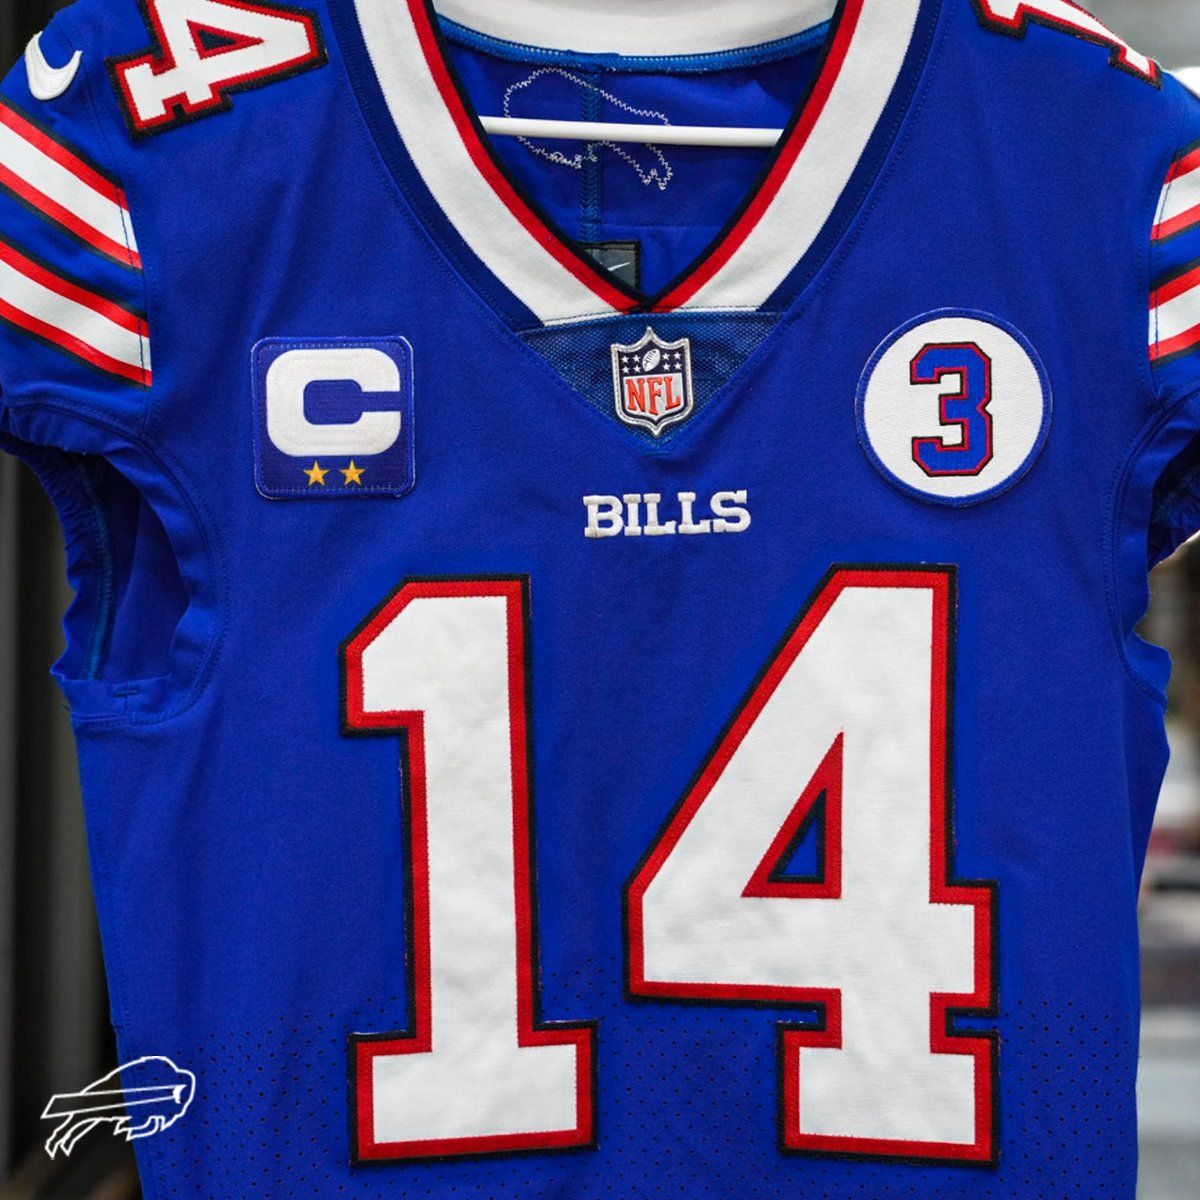 Buffalo Bills to wear a #3 patch in support of Damar Hamlin for Week 18 game vs New England Patriots